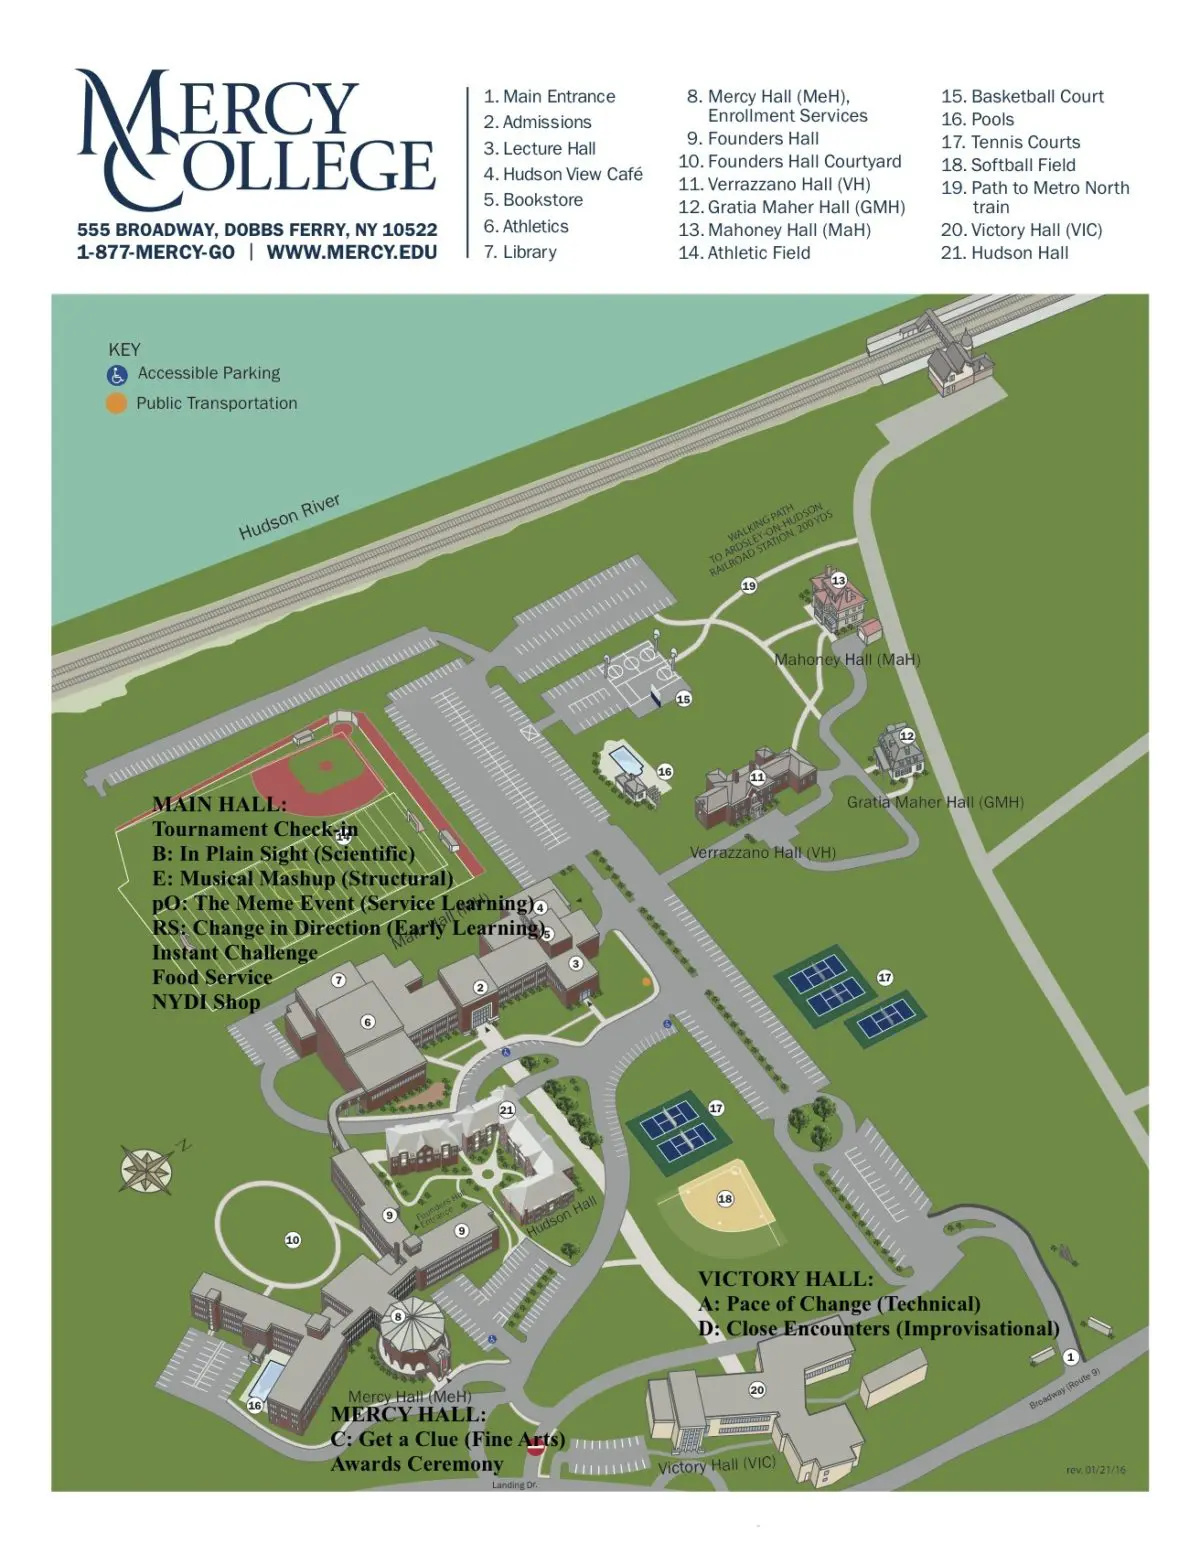 MercyCollegeMap2016 with challenges